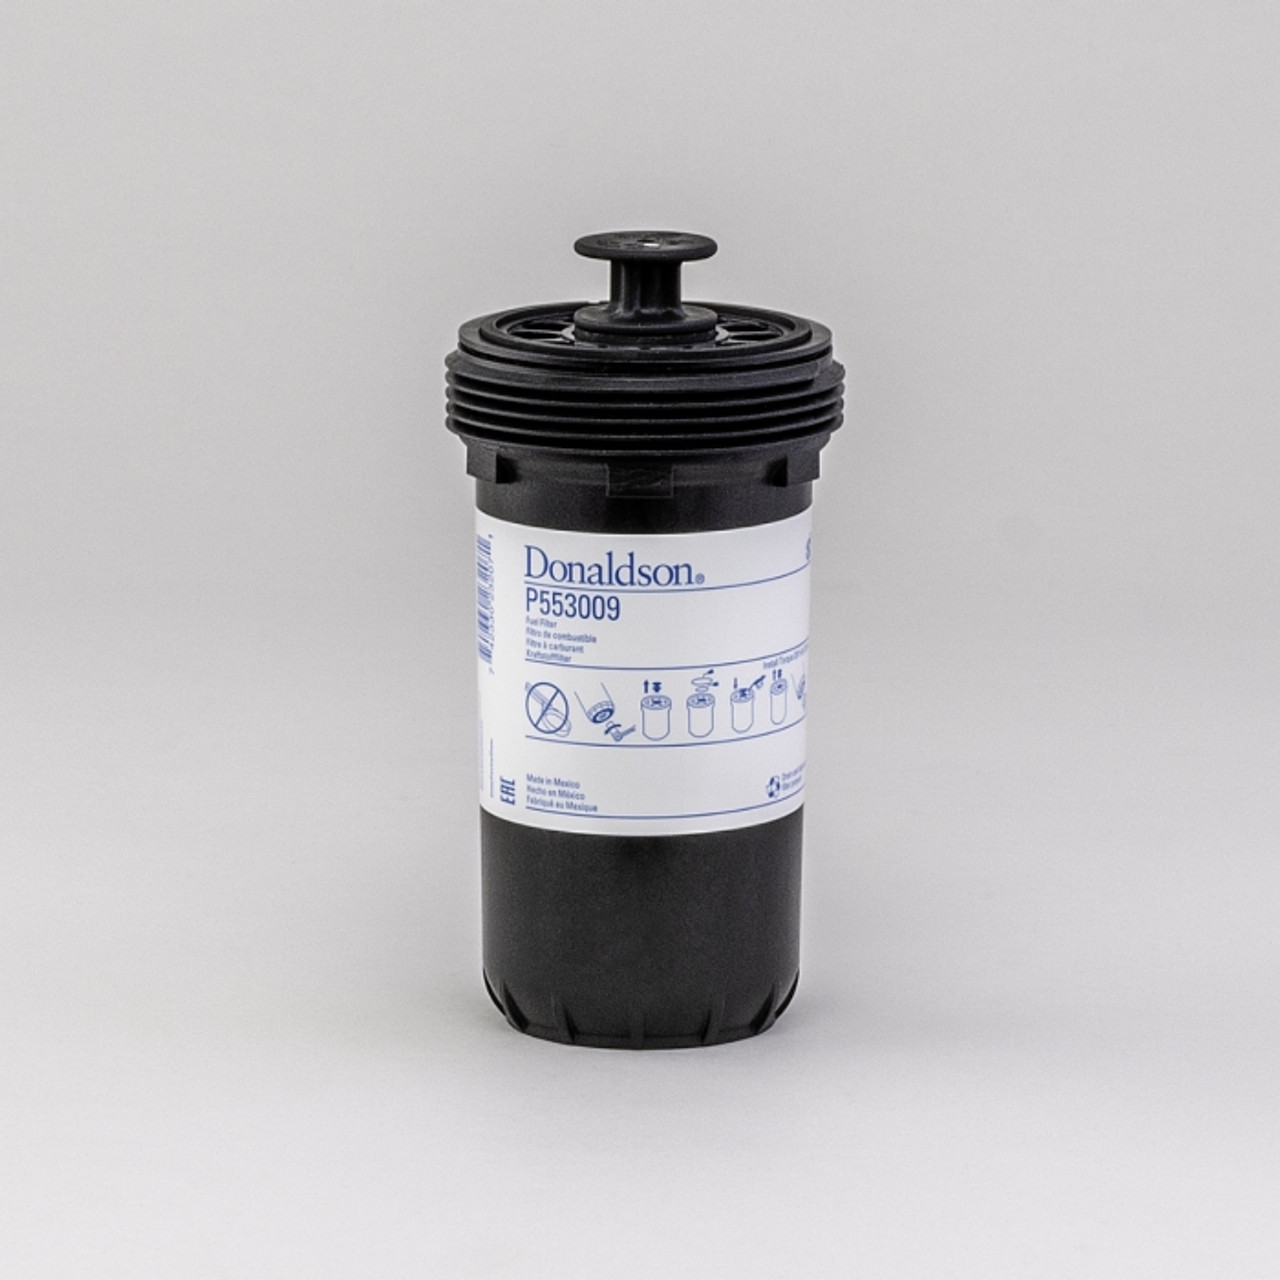 P553009 DONALDSON FUEL FILTER, SPIN-ON